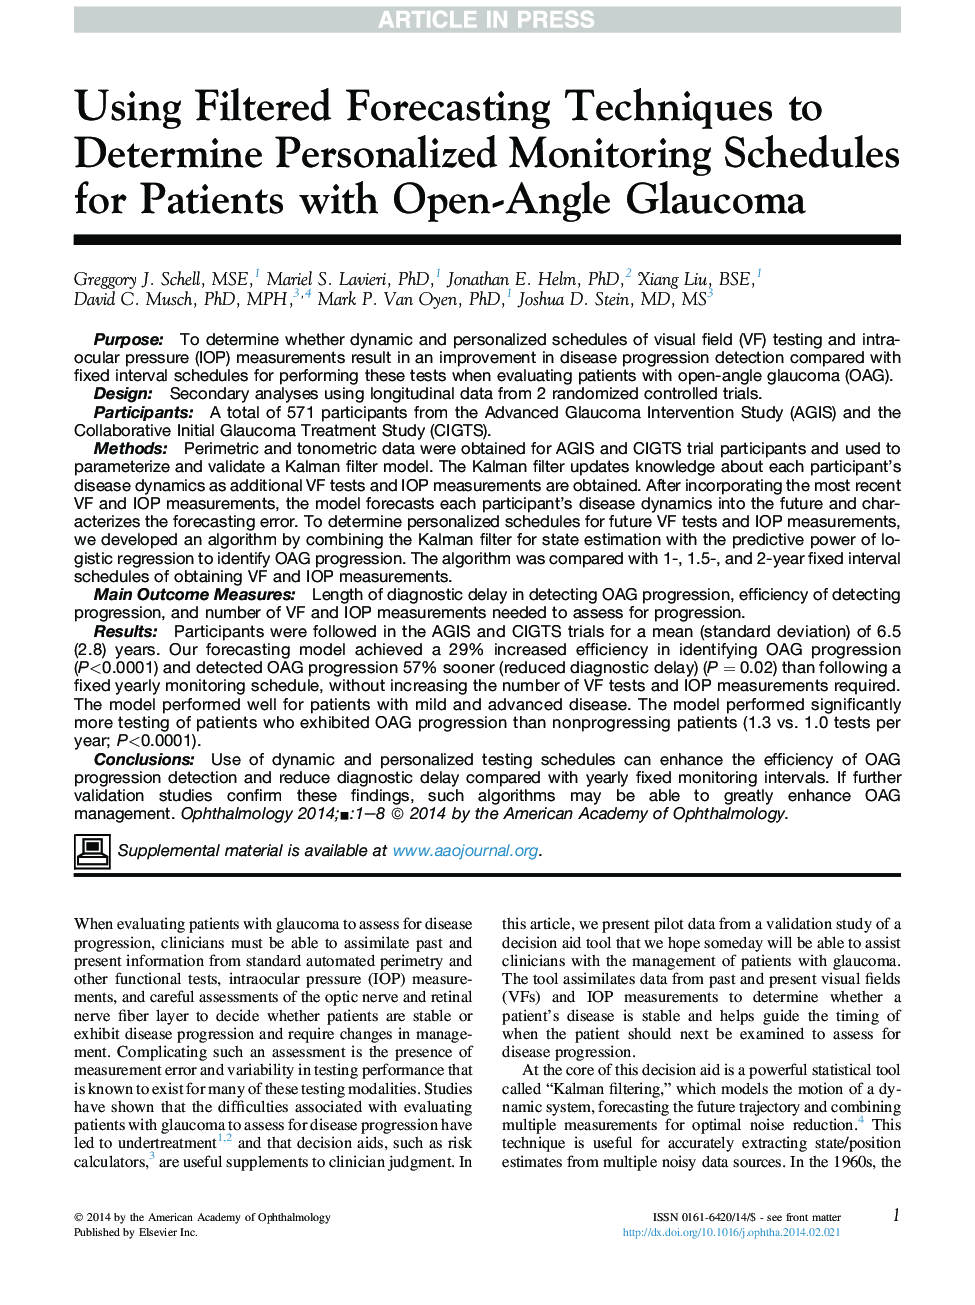 Using Filtered Forecasting Techniques to Determine Personalized Monitoring Schedules for Patients with Open-Angle Glaucoma